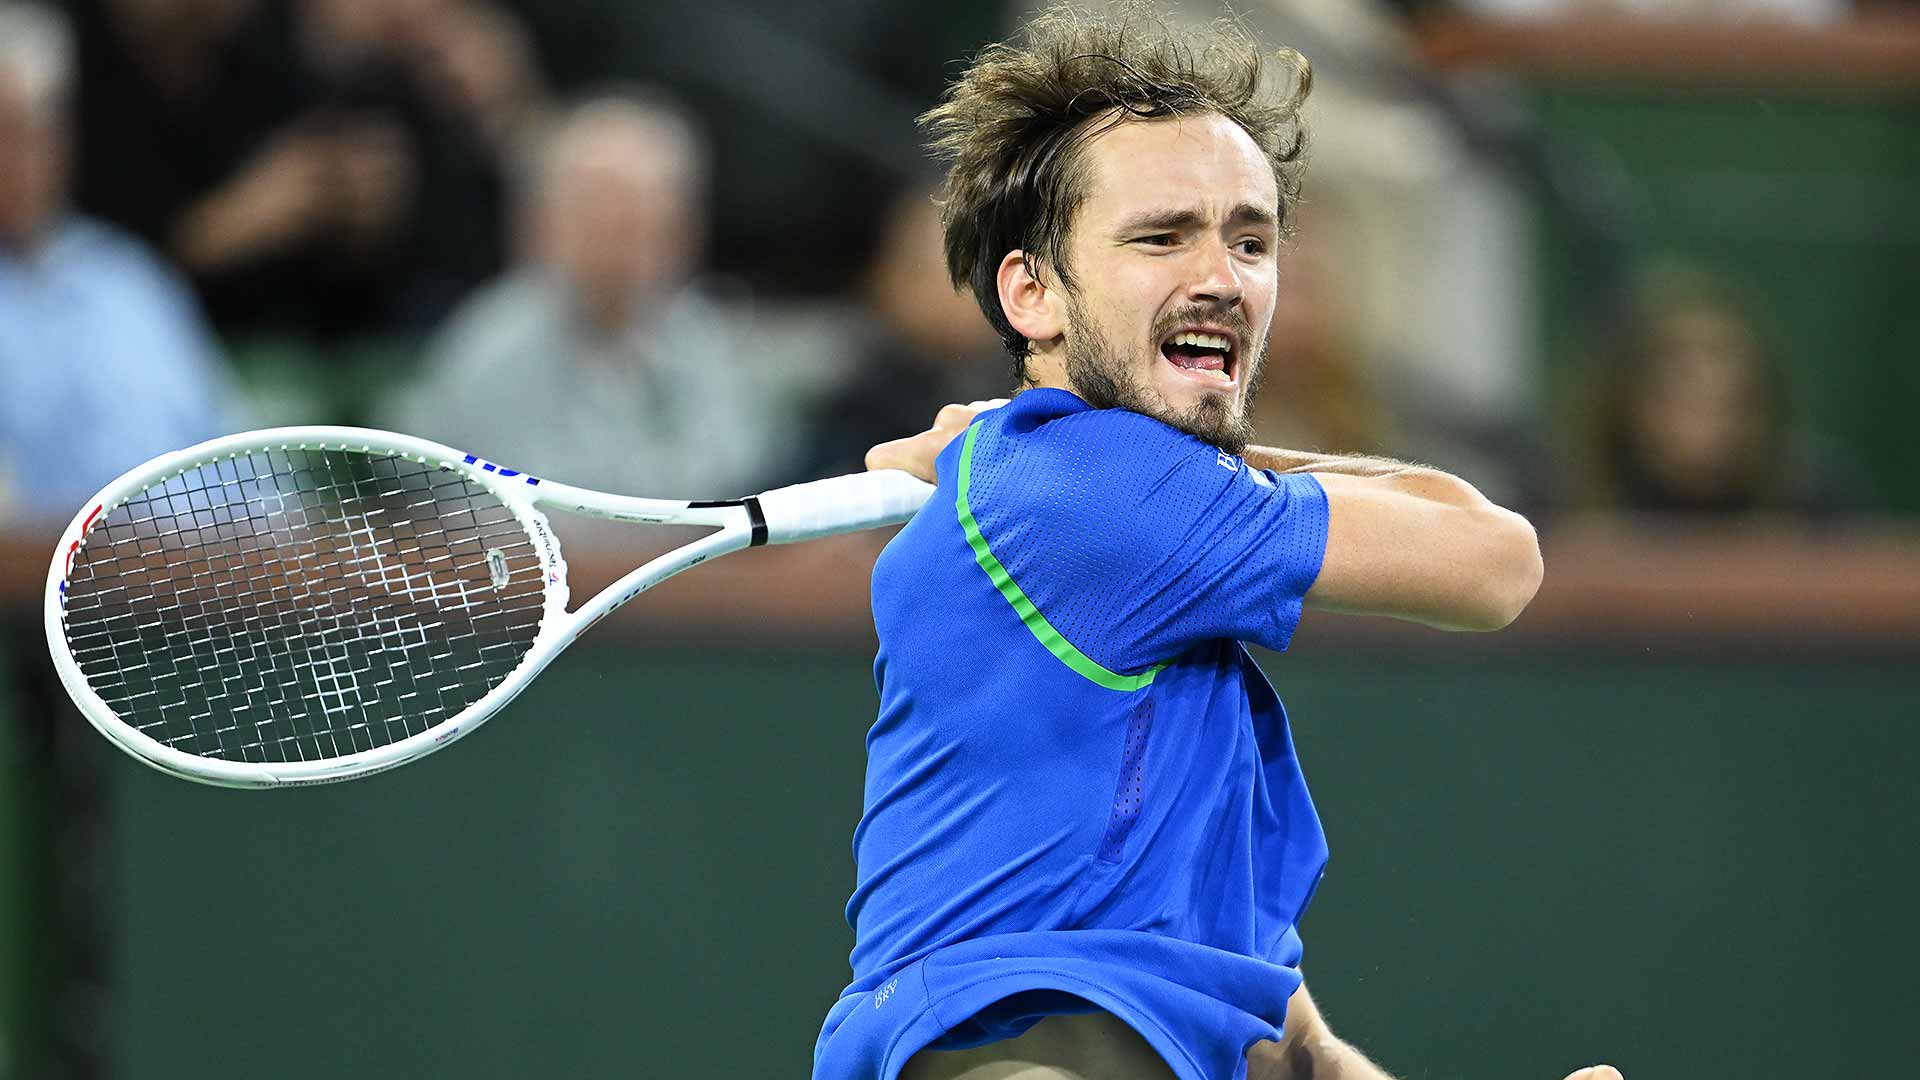 Daniil Medvedev won 19 straight matches before falling in the Indian Wells final to Carlos Alcaraz.